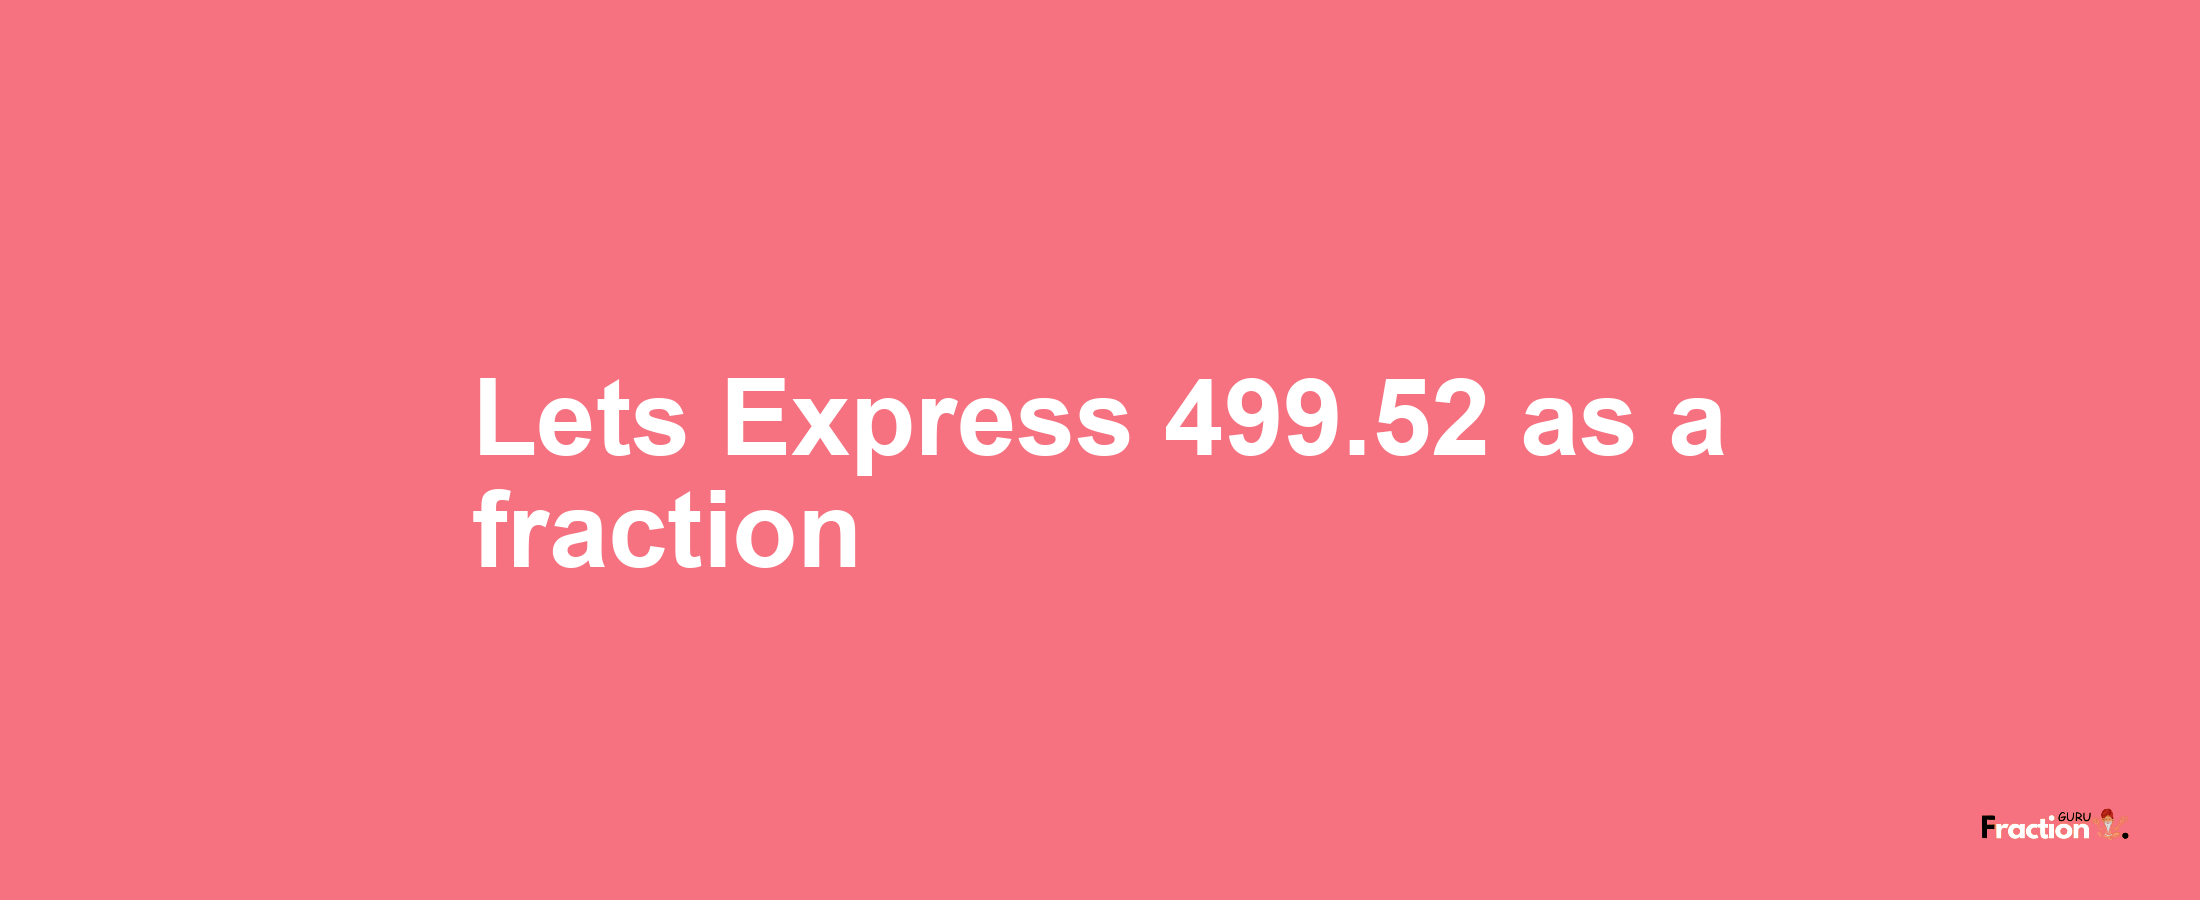 Lets Express 499.52 as afraction